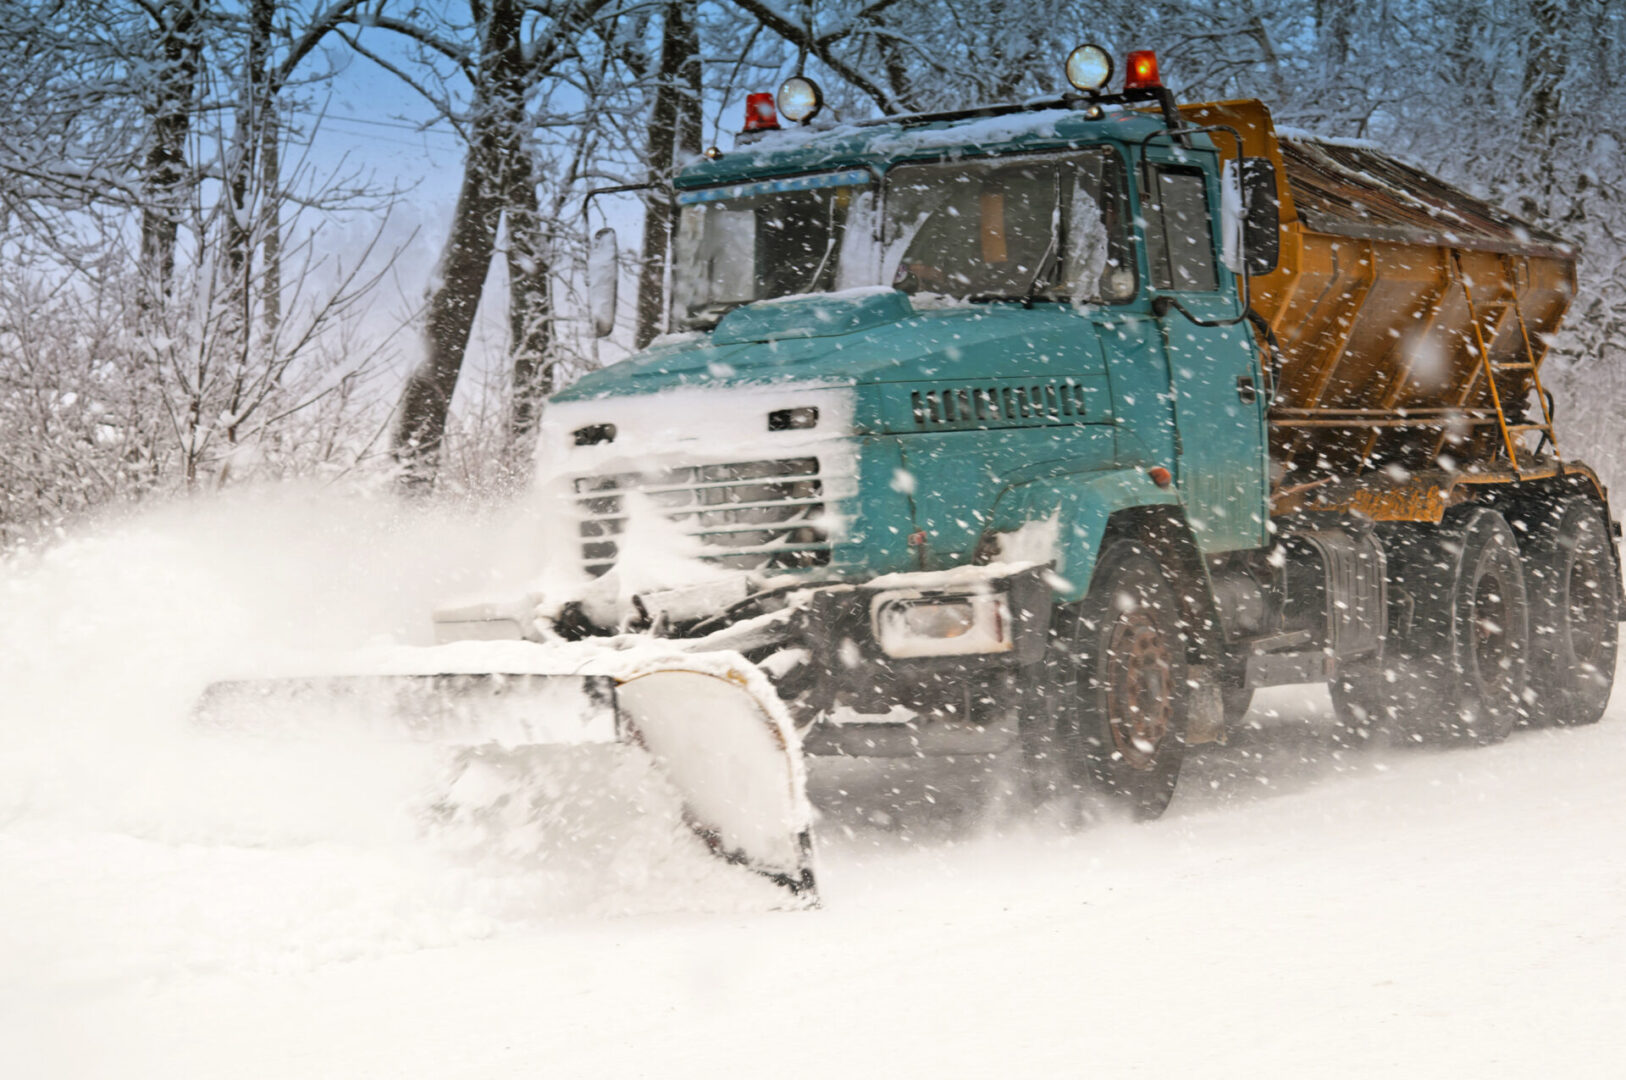 snow plow doing snow removal during blizzard